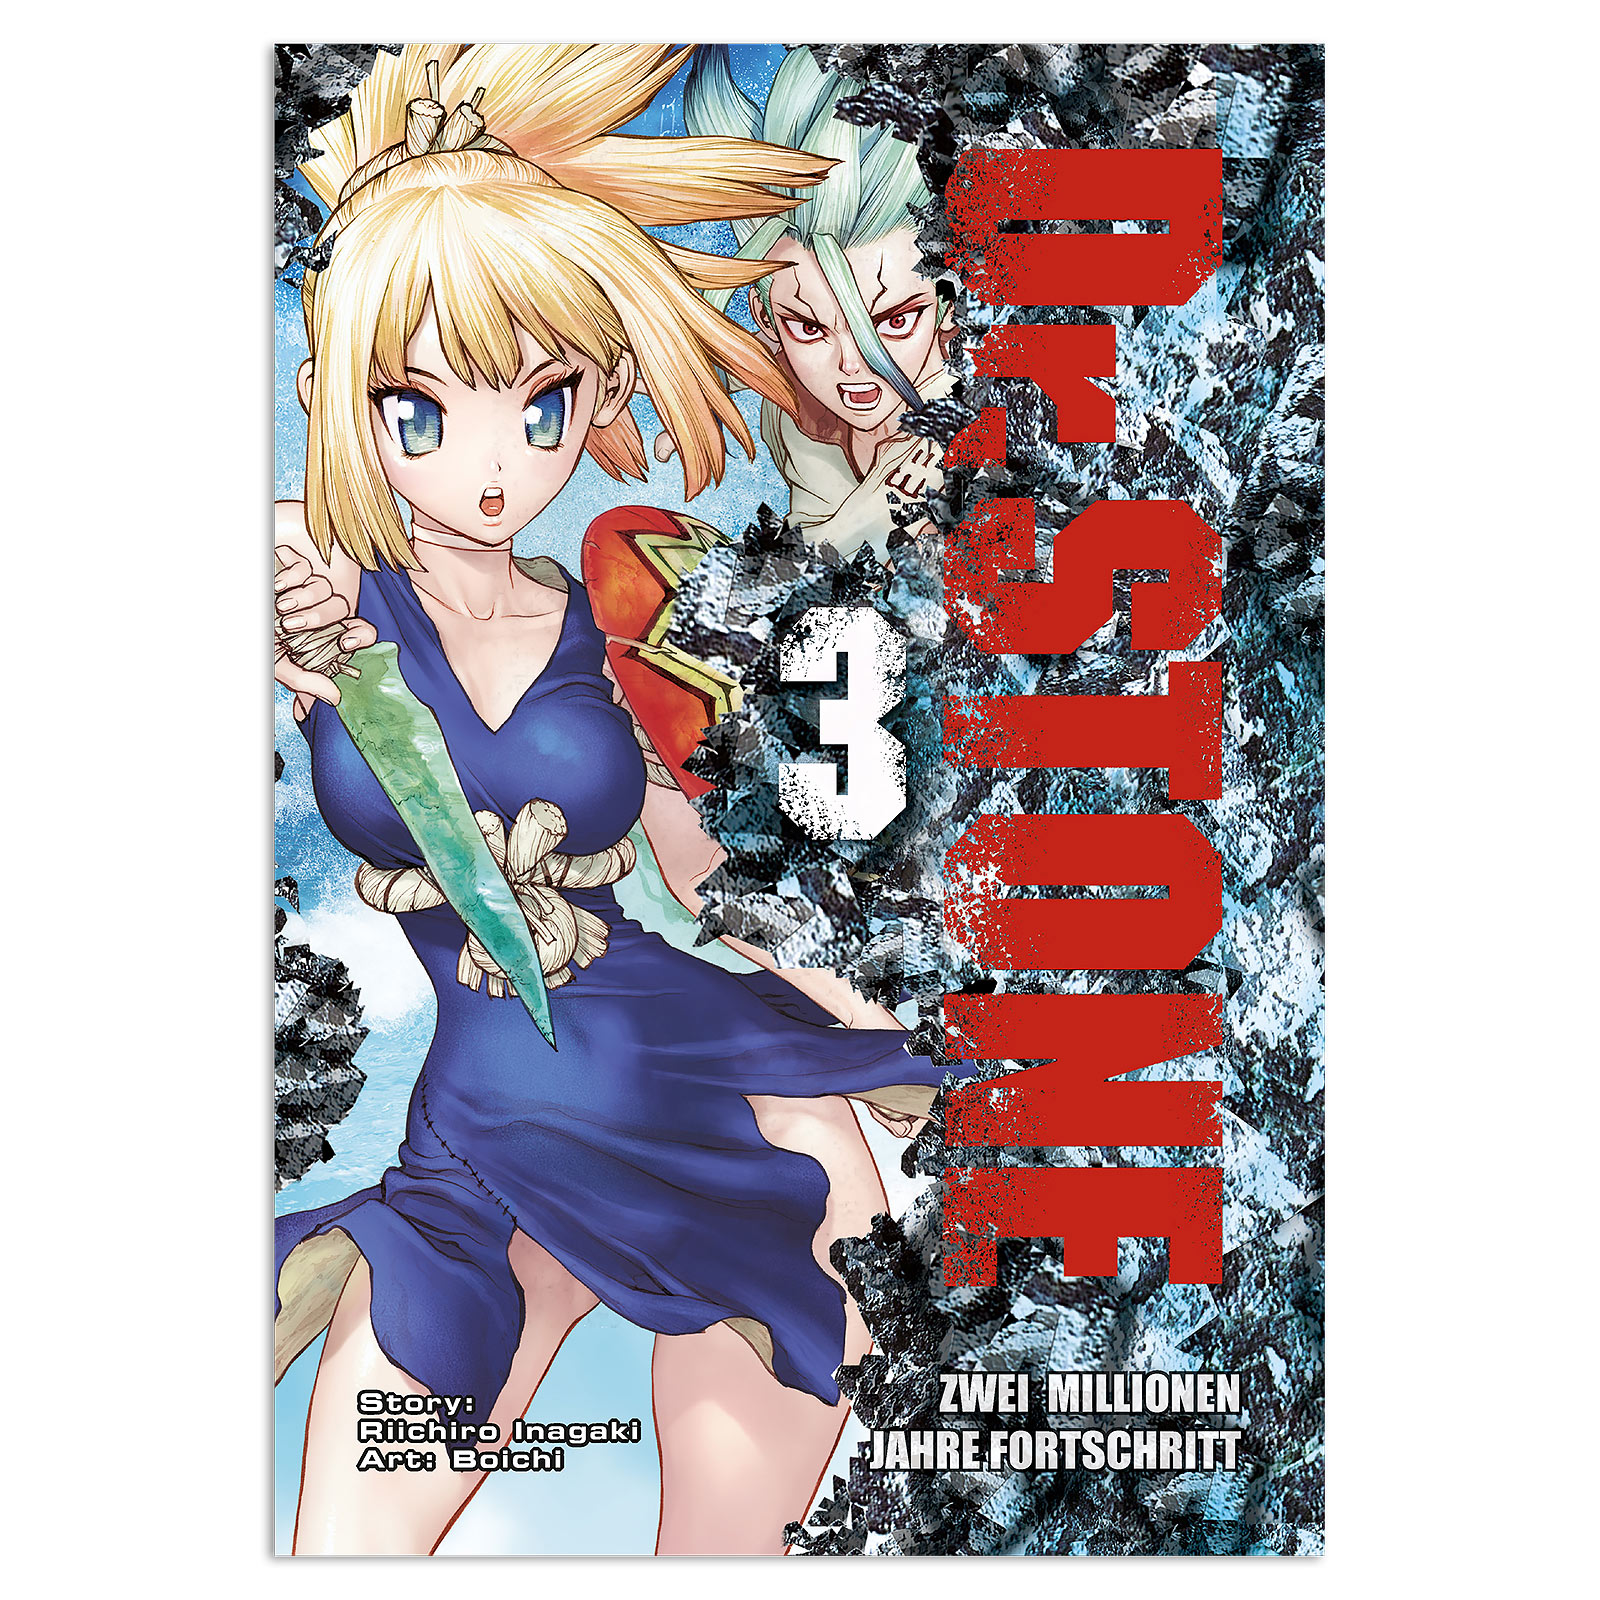 Dr. Stone - Two Million Years of Progress Volume 3 Paperback